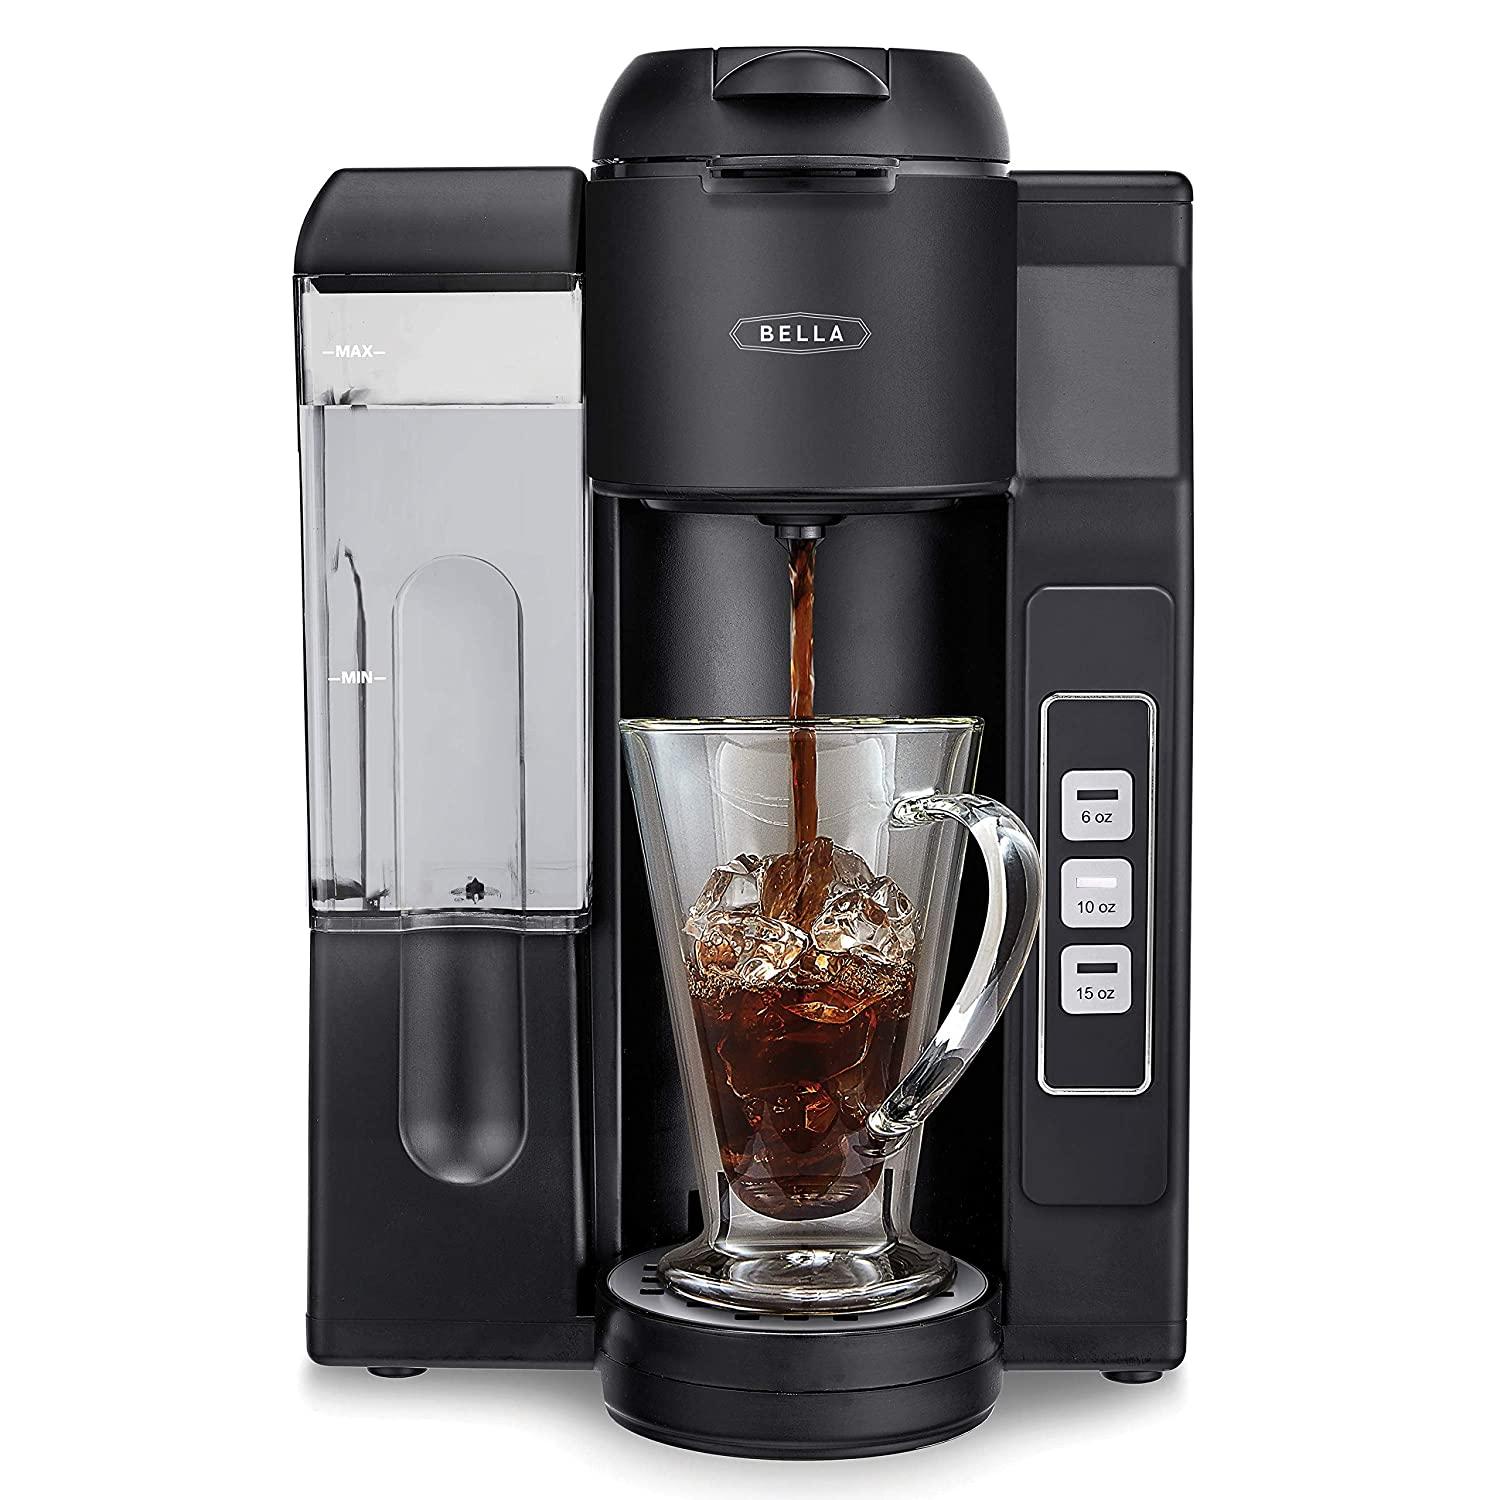 Bella Dual Brew Coffee Maker for $39 Shipped